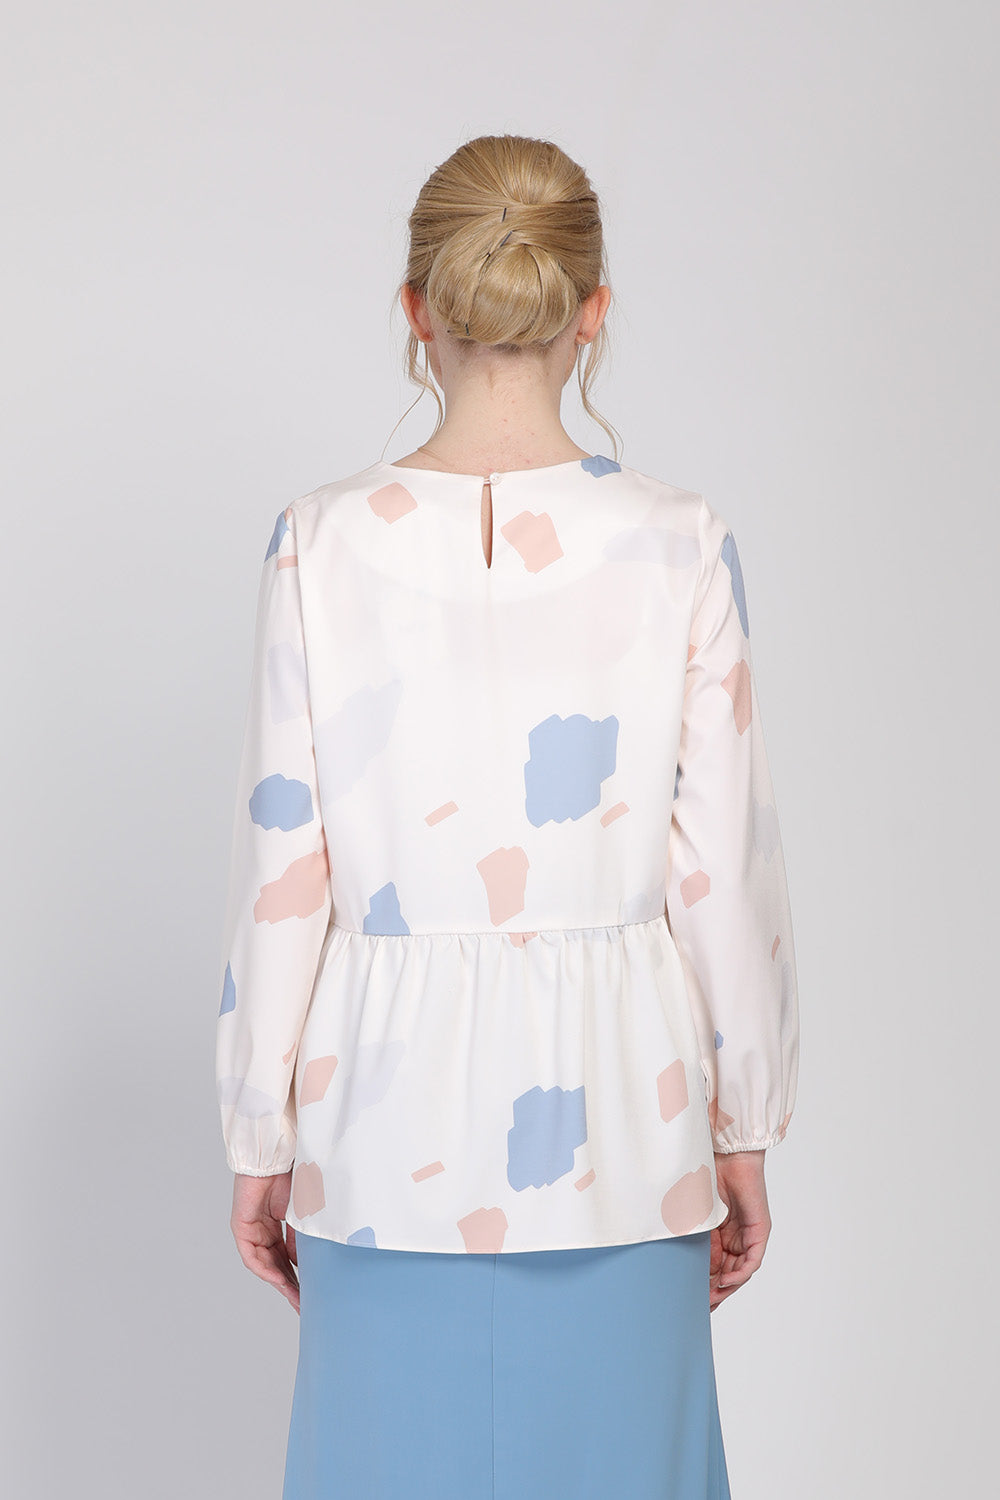 The Ceria 2.0 Abstract Prints Blouse in Nude